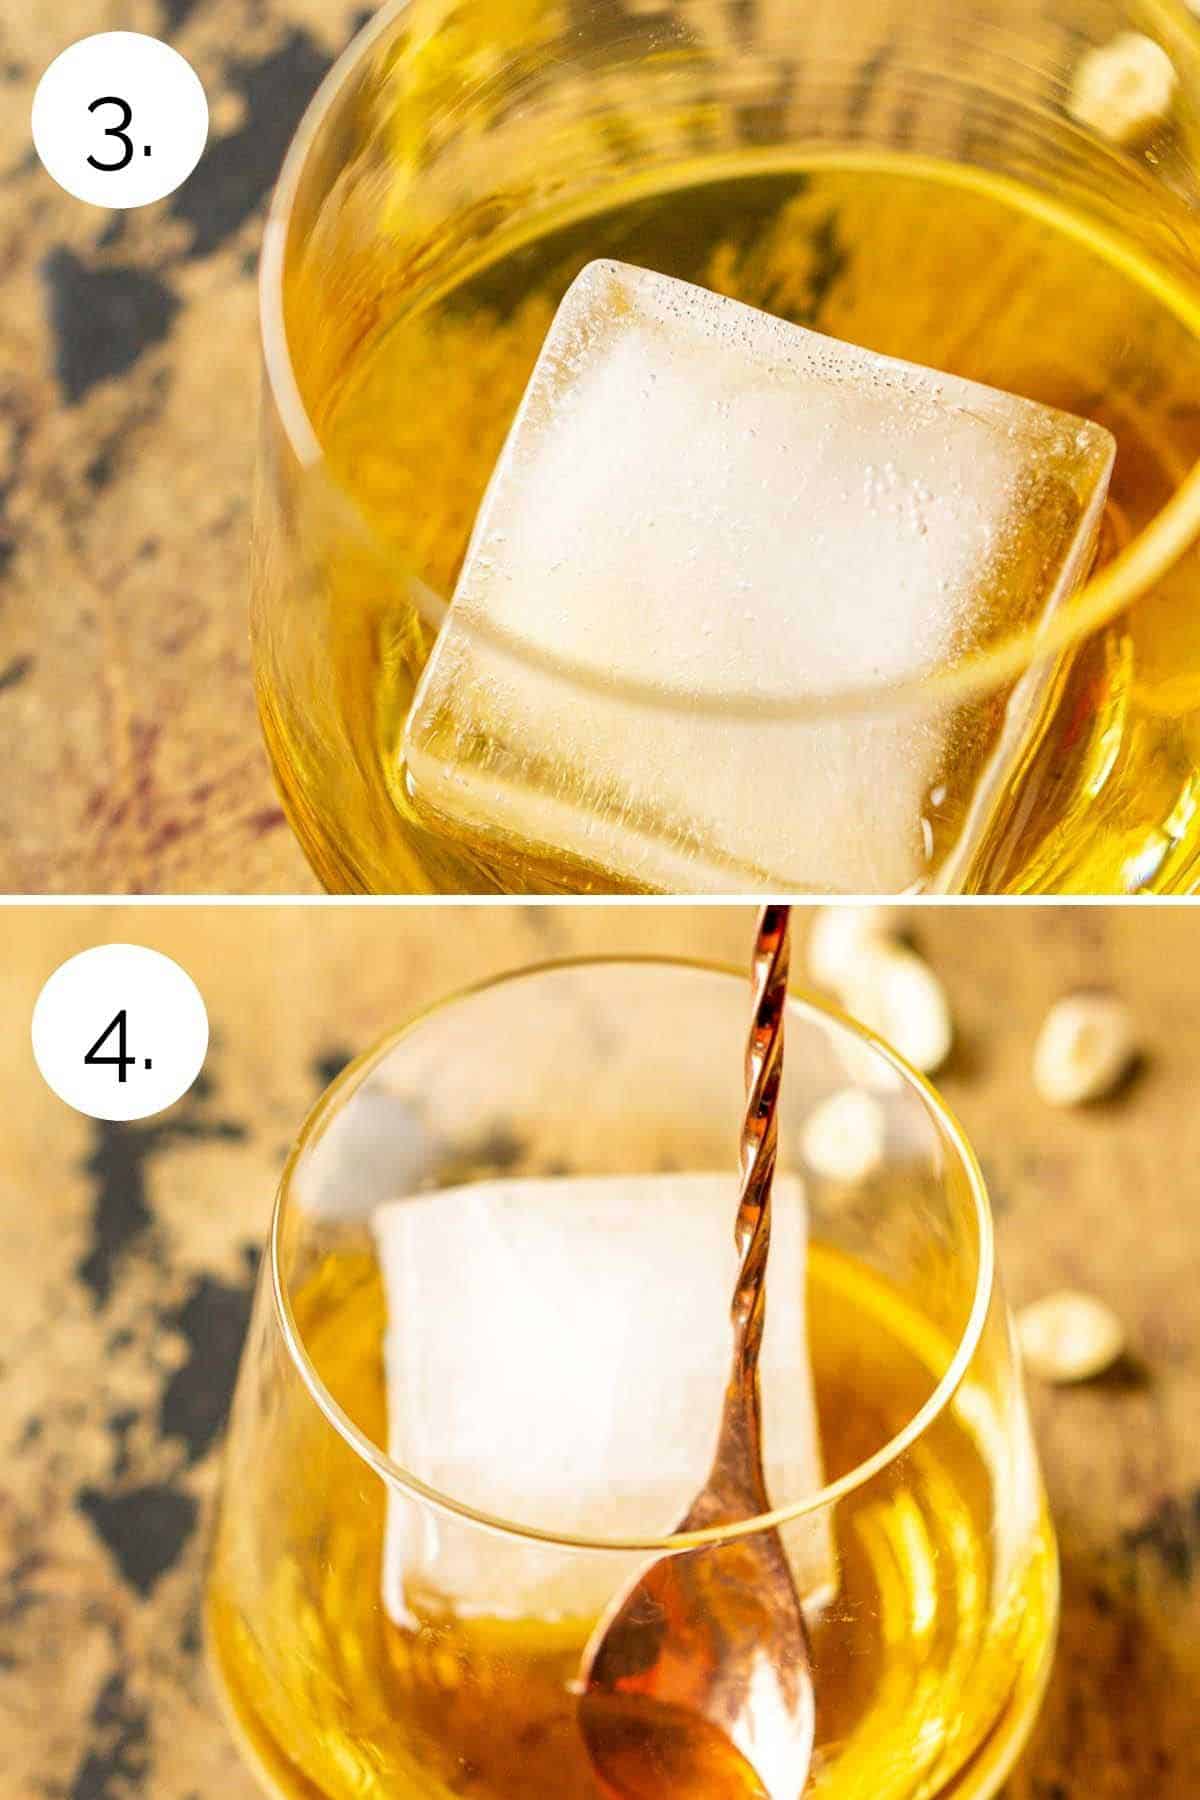 A collage showing the process of adding the ice cube and stirring it to chill and dilute.